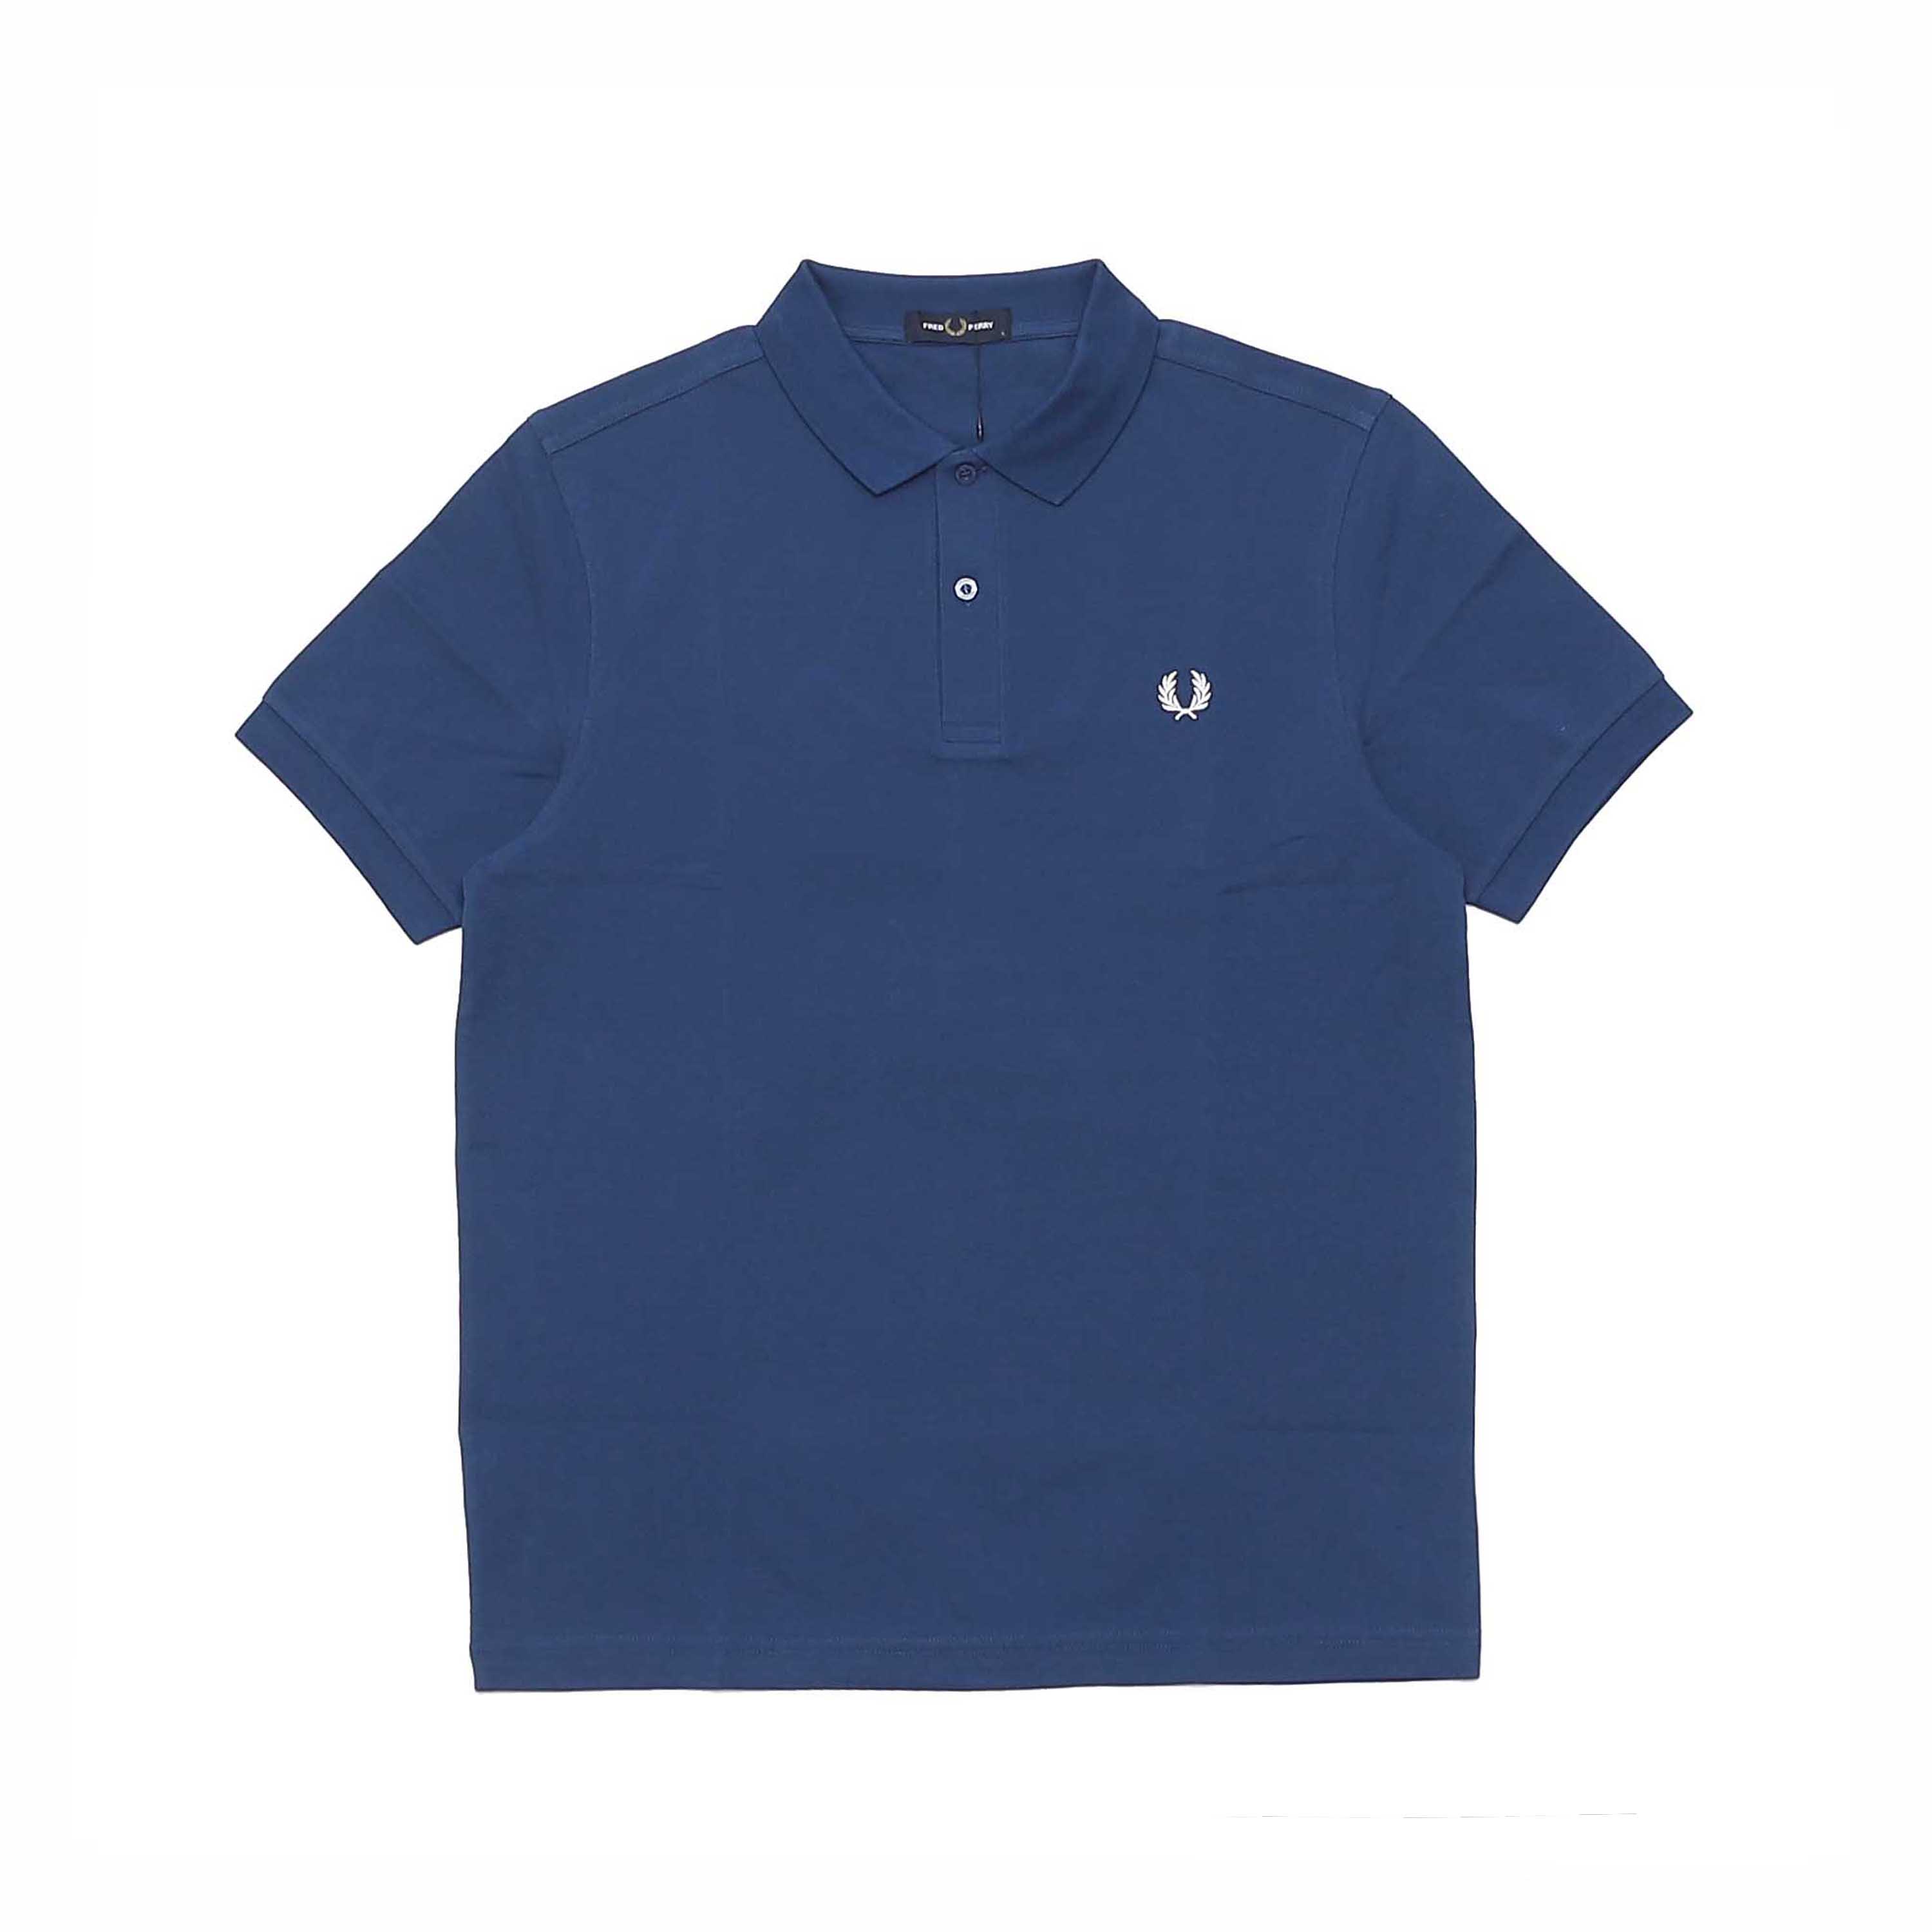 PLAIN FRED PERRY SHIRT - SHADED COBALT